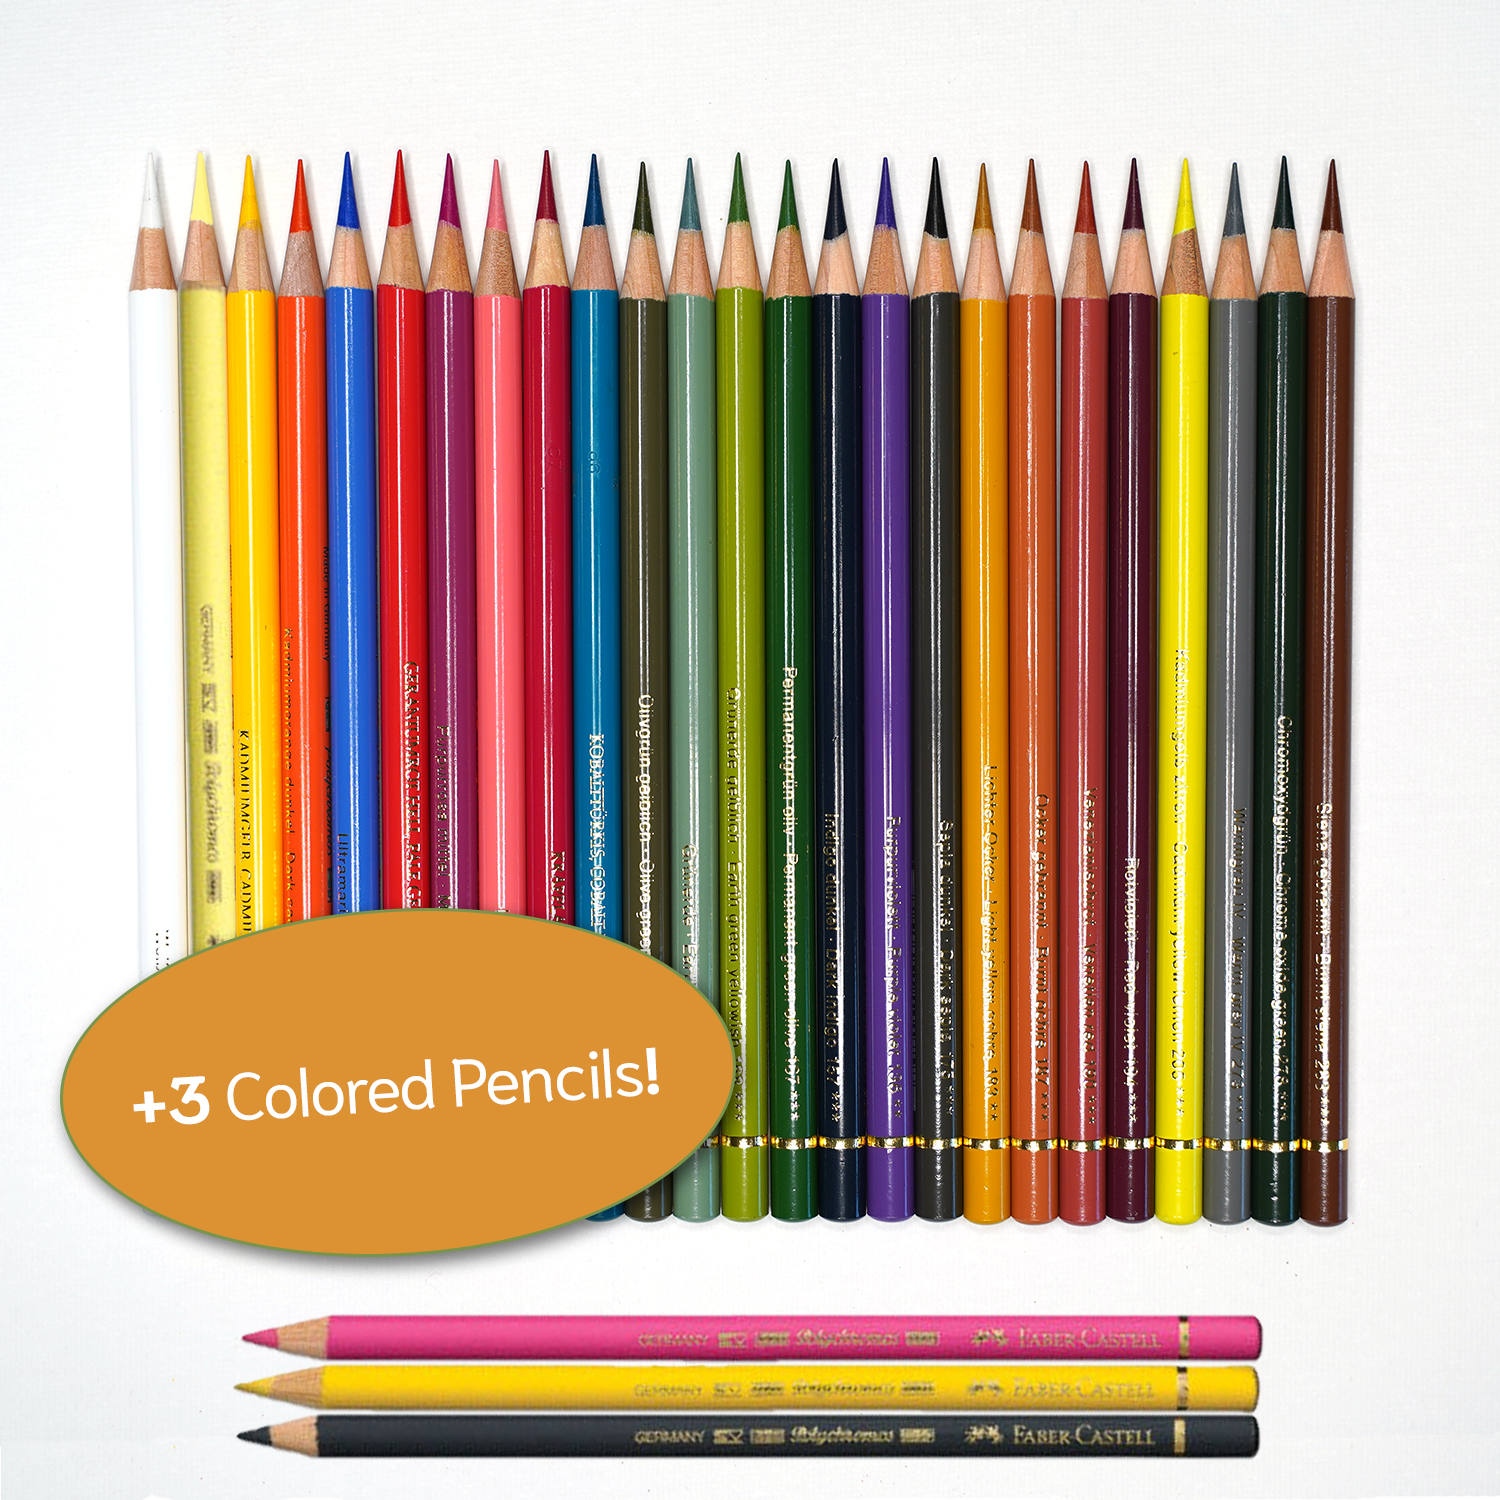 Polychromos Colored Pencil Sets by Faber-Castell truly live up to